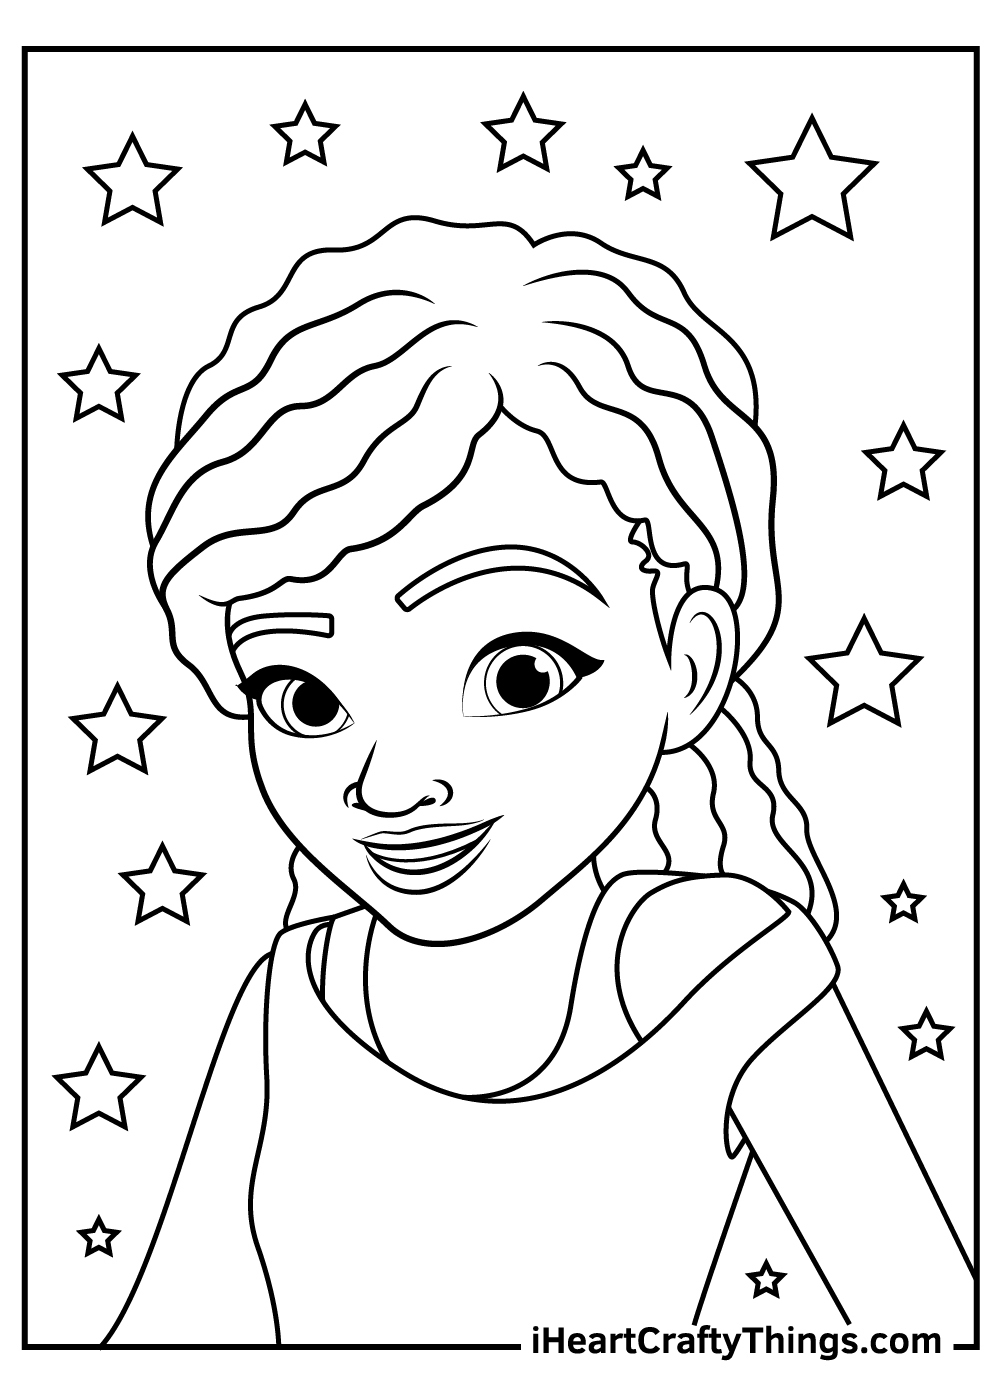 Lego Friends Coloring Pages (Updated 2021) concernant Coloriage Lego Friends